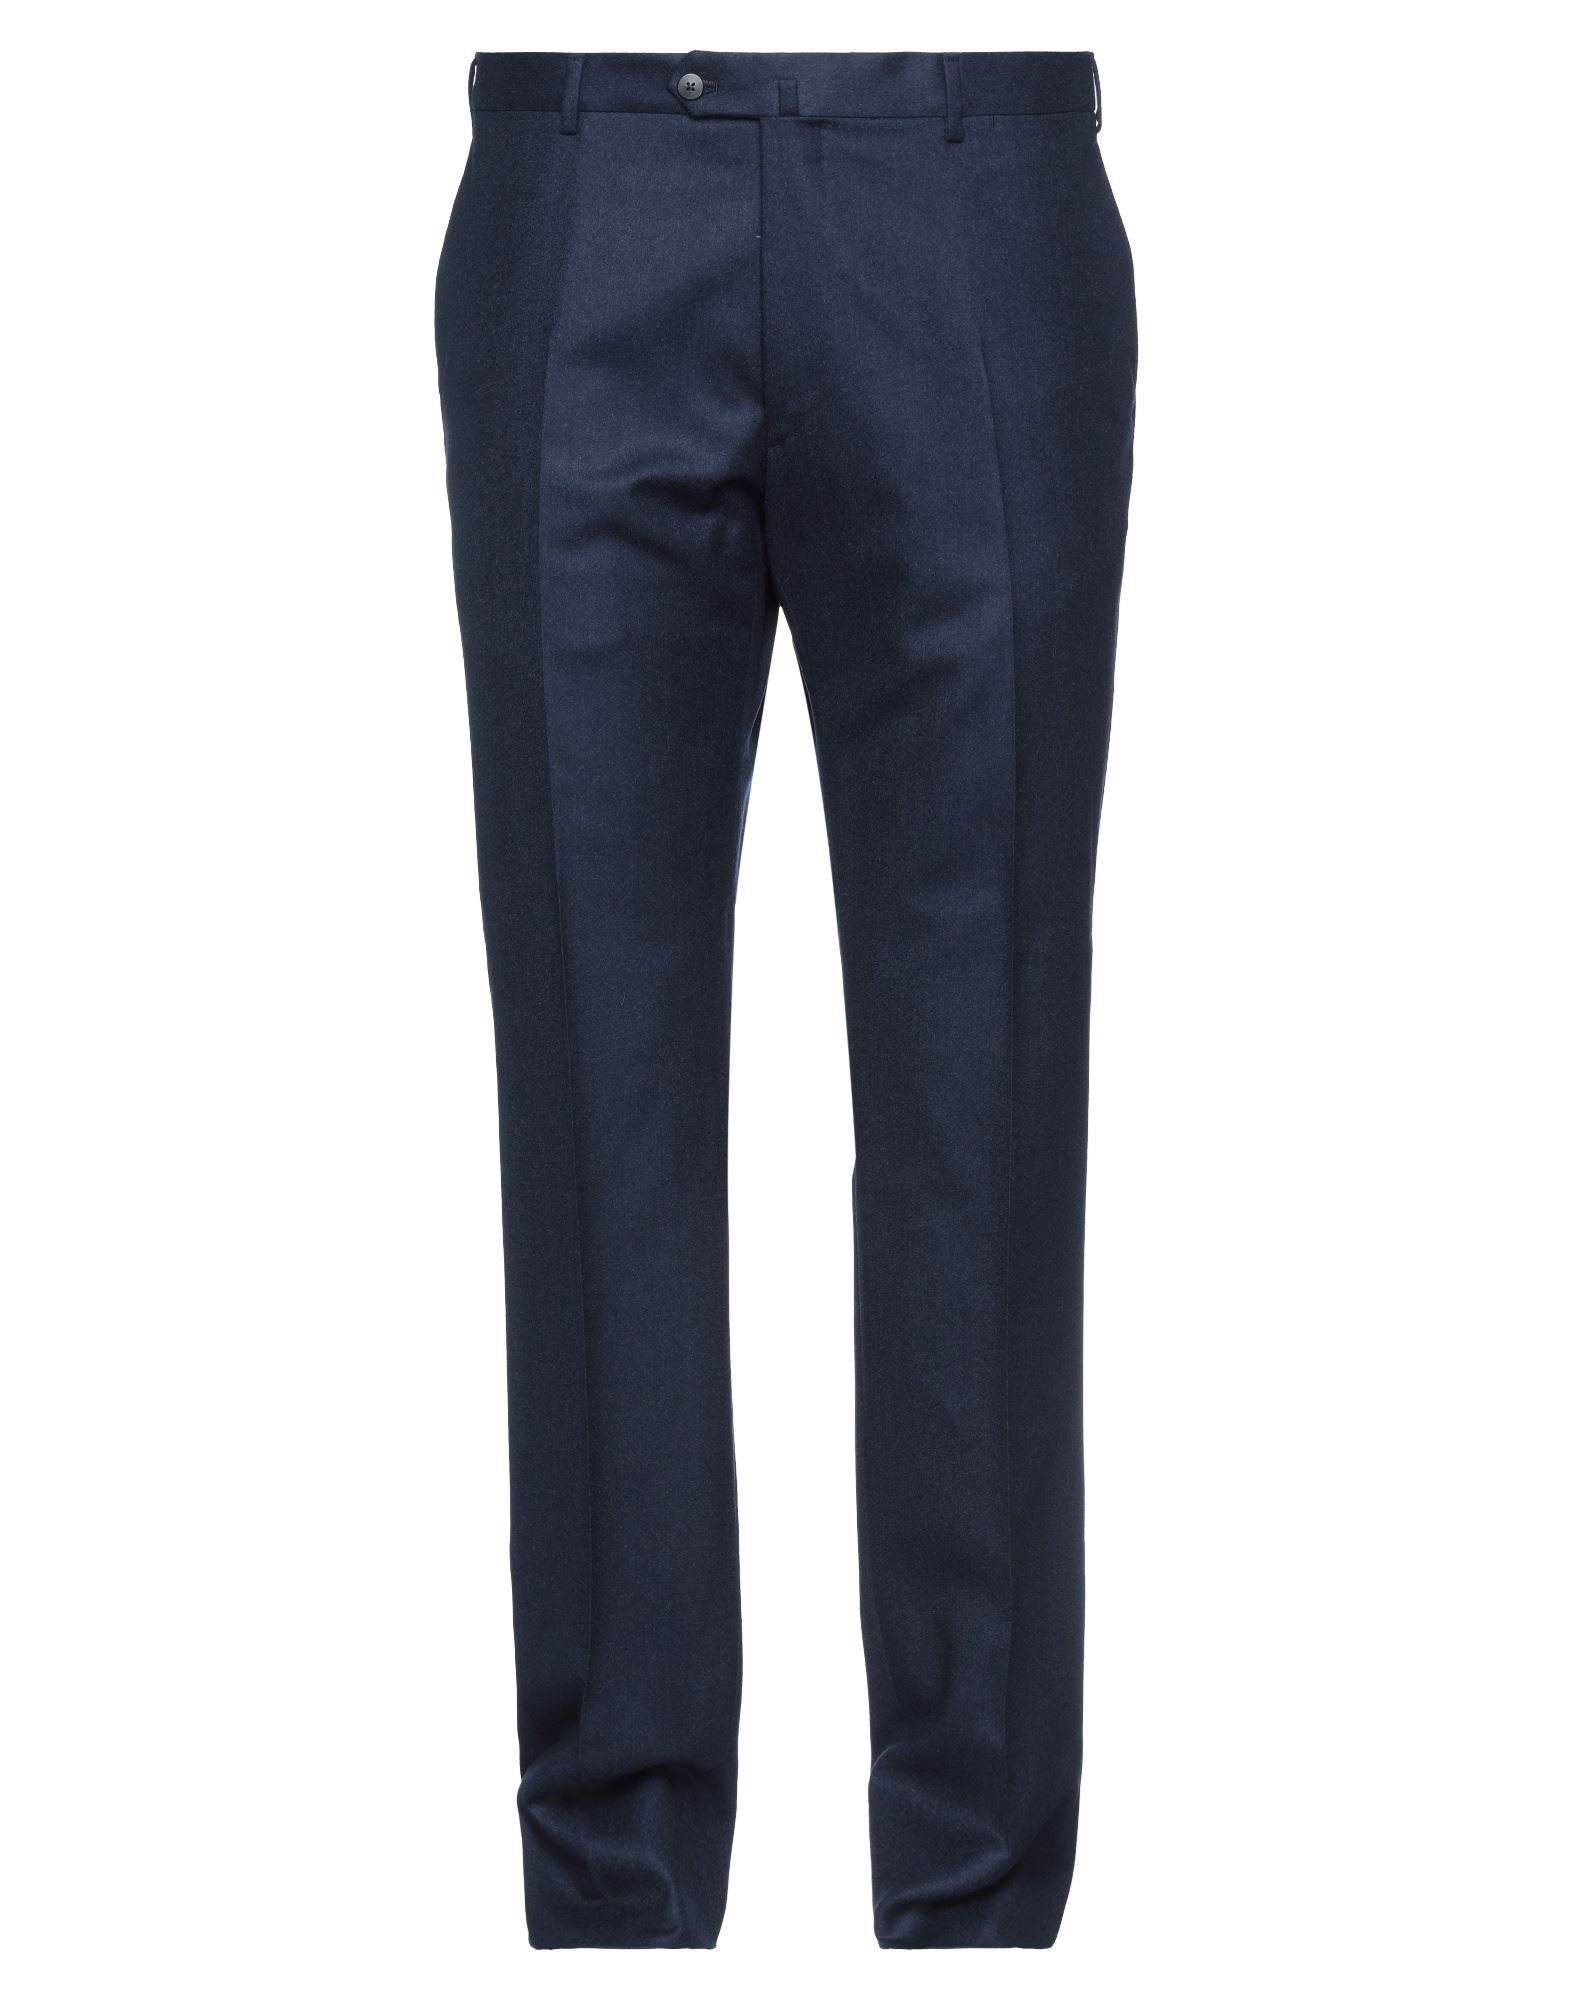 CARUSO CARUSO MAN PANTS MIDNIGHT BLUE SIZE 42 WOOL